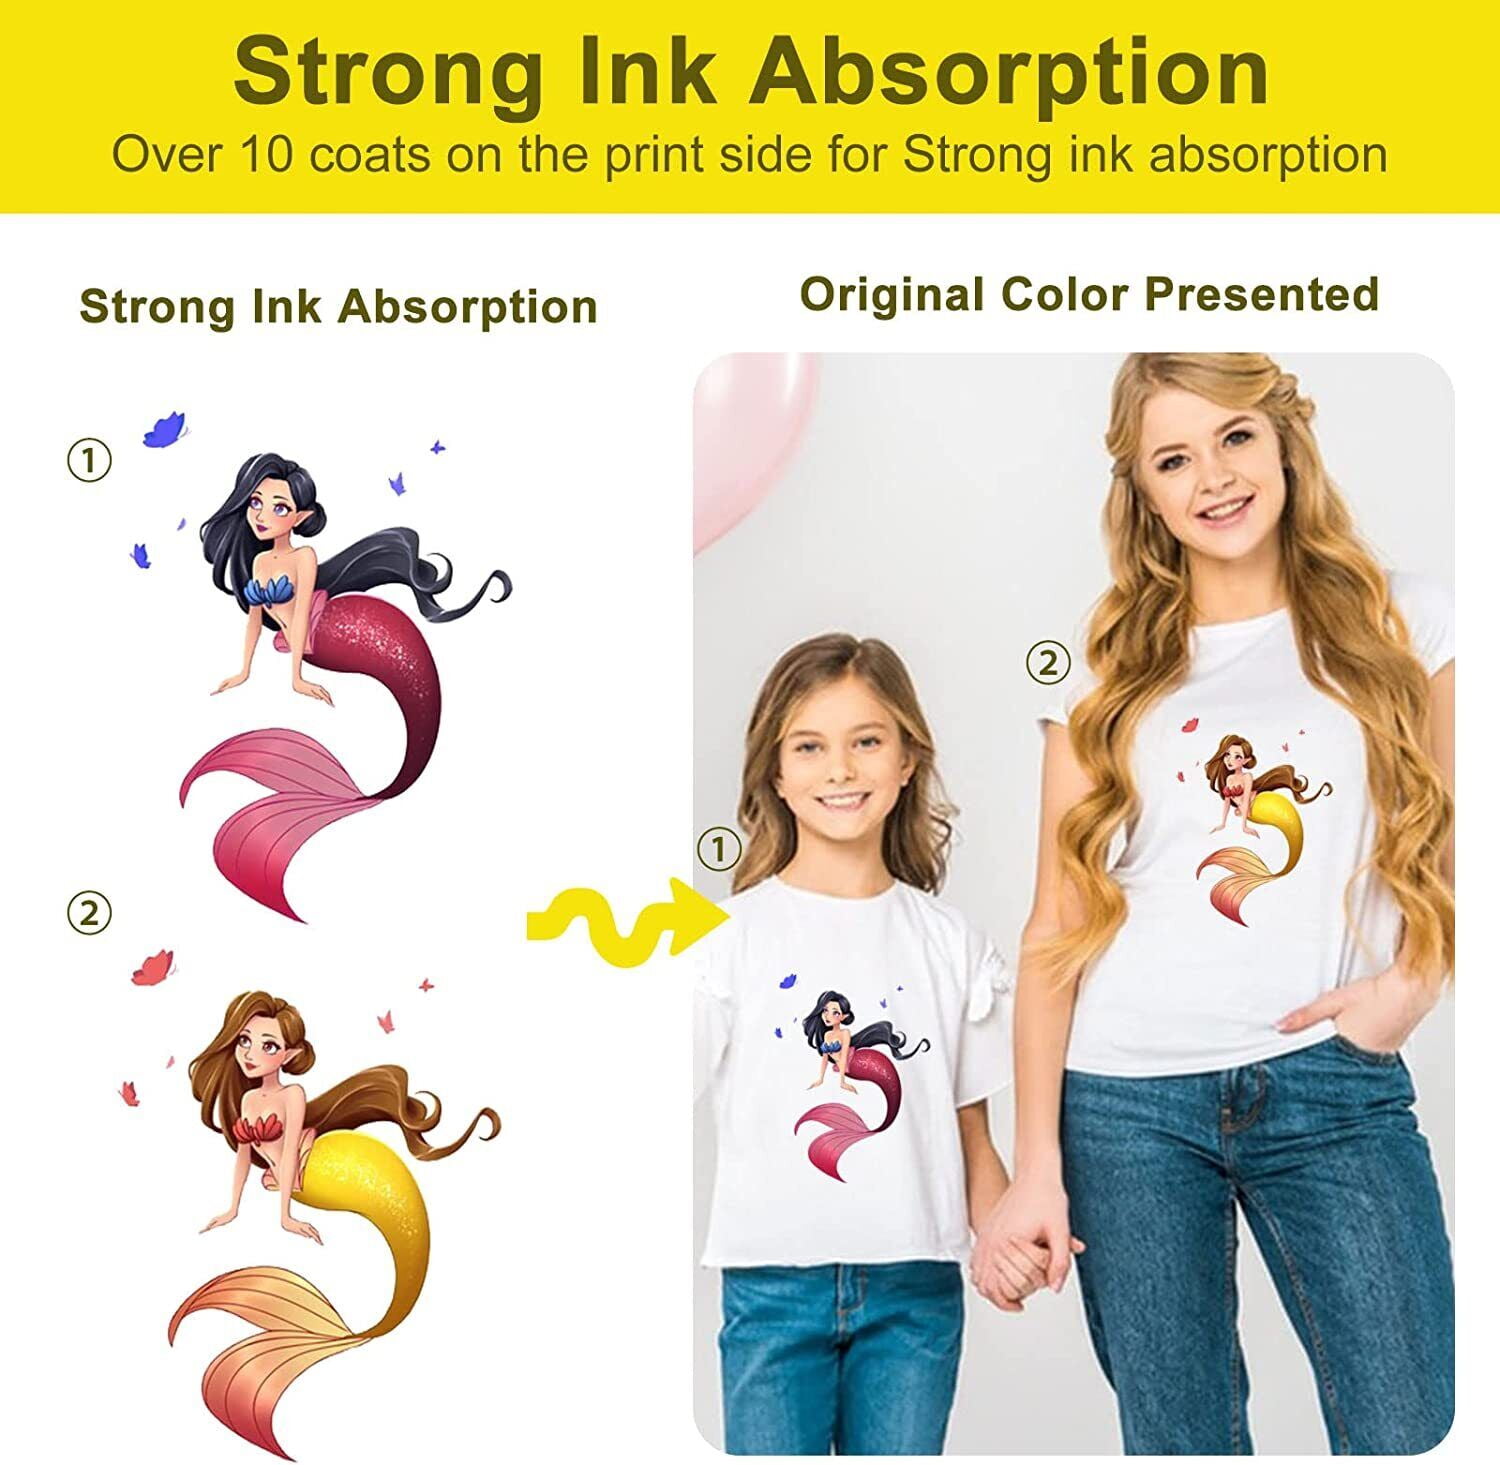 HTVRONT DTF Transfer Film for Sublimation - 30 Sheets of A4 (8.3 11.7) DTF  Paper for Inkjet Printers Direct to Film Transfer Paper for Cotton T Shirts  Easy to Use Vivid Colors